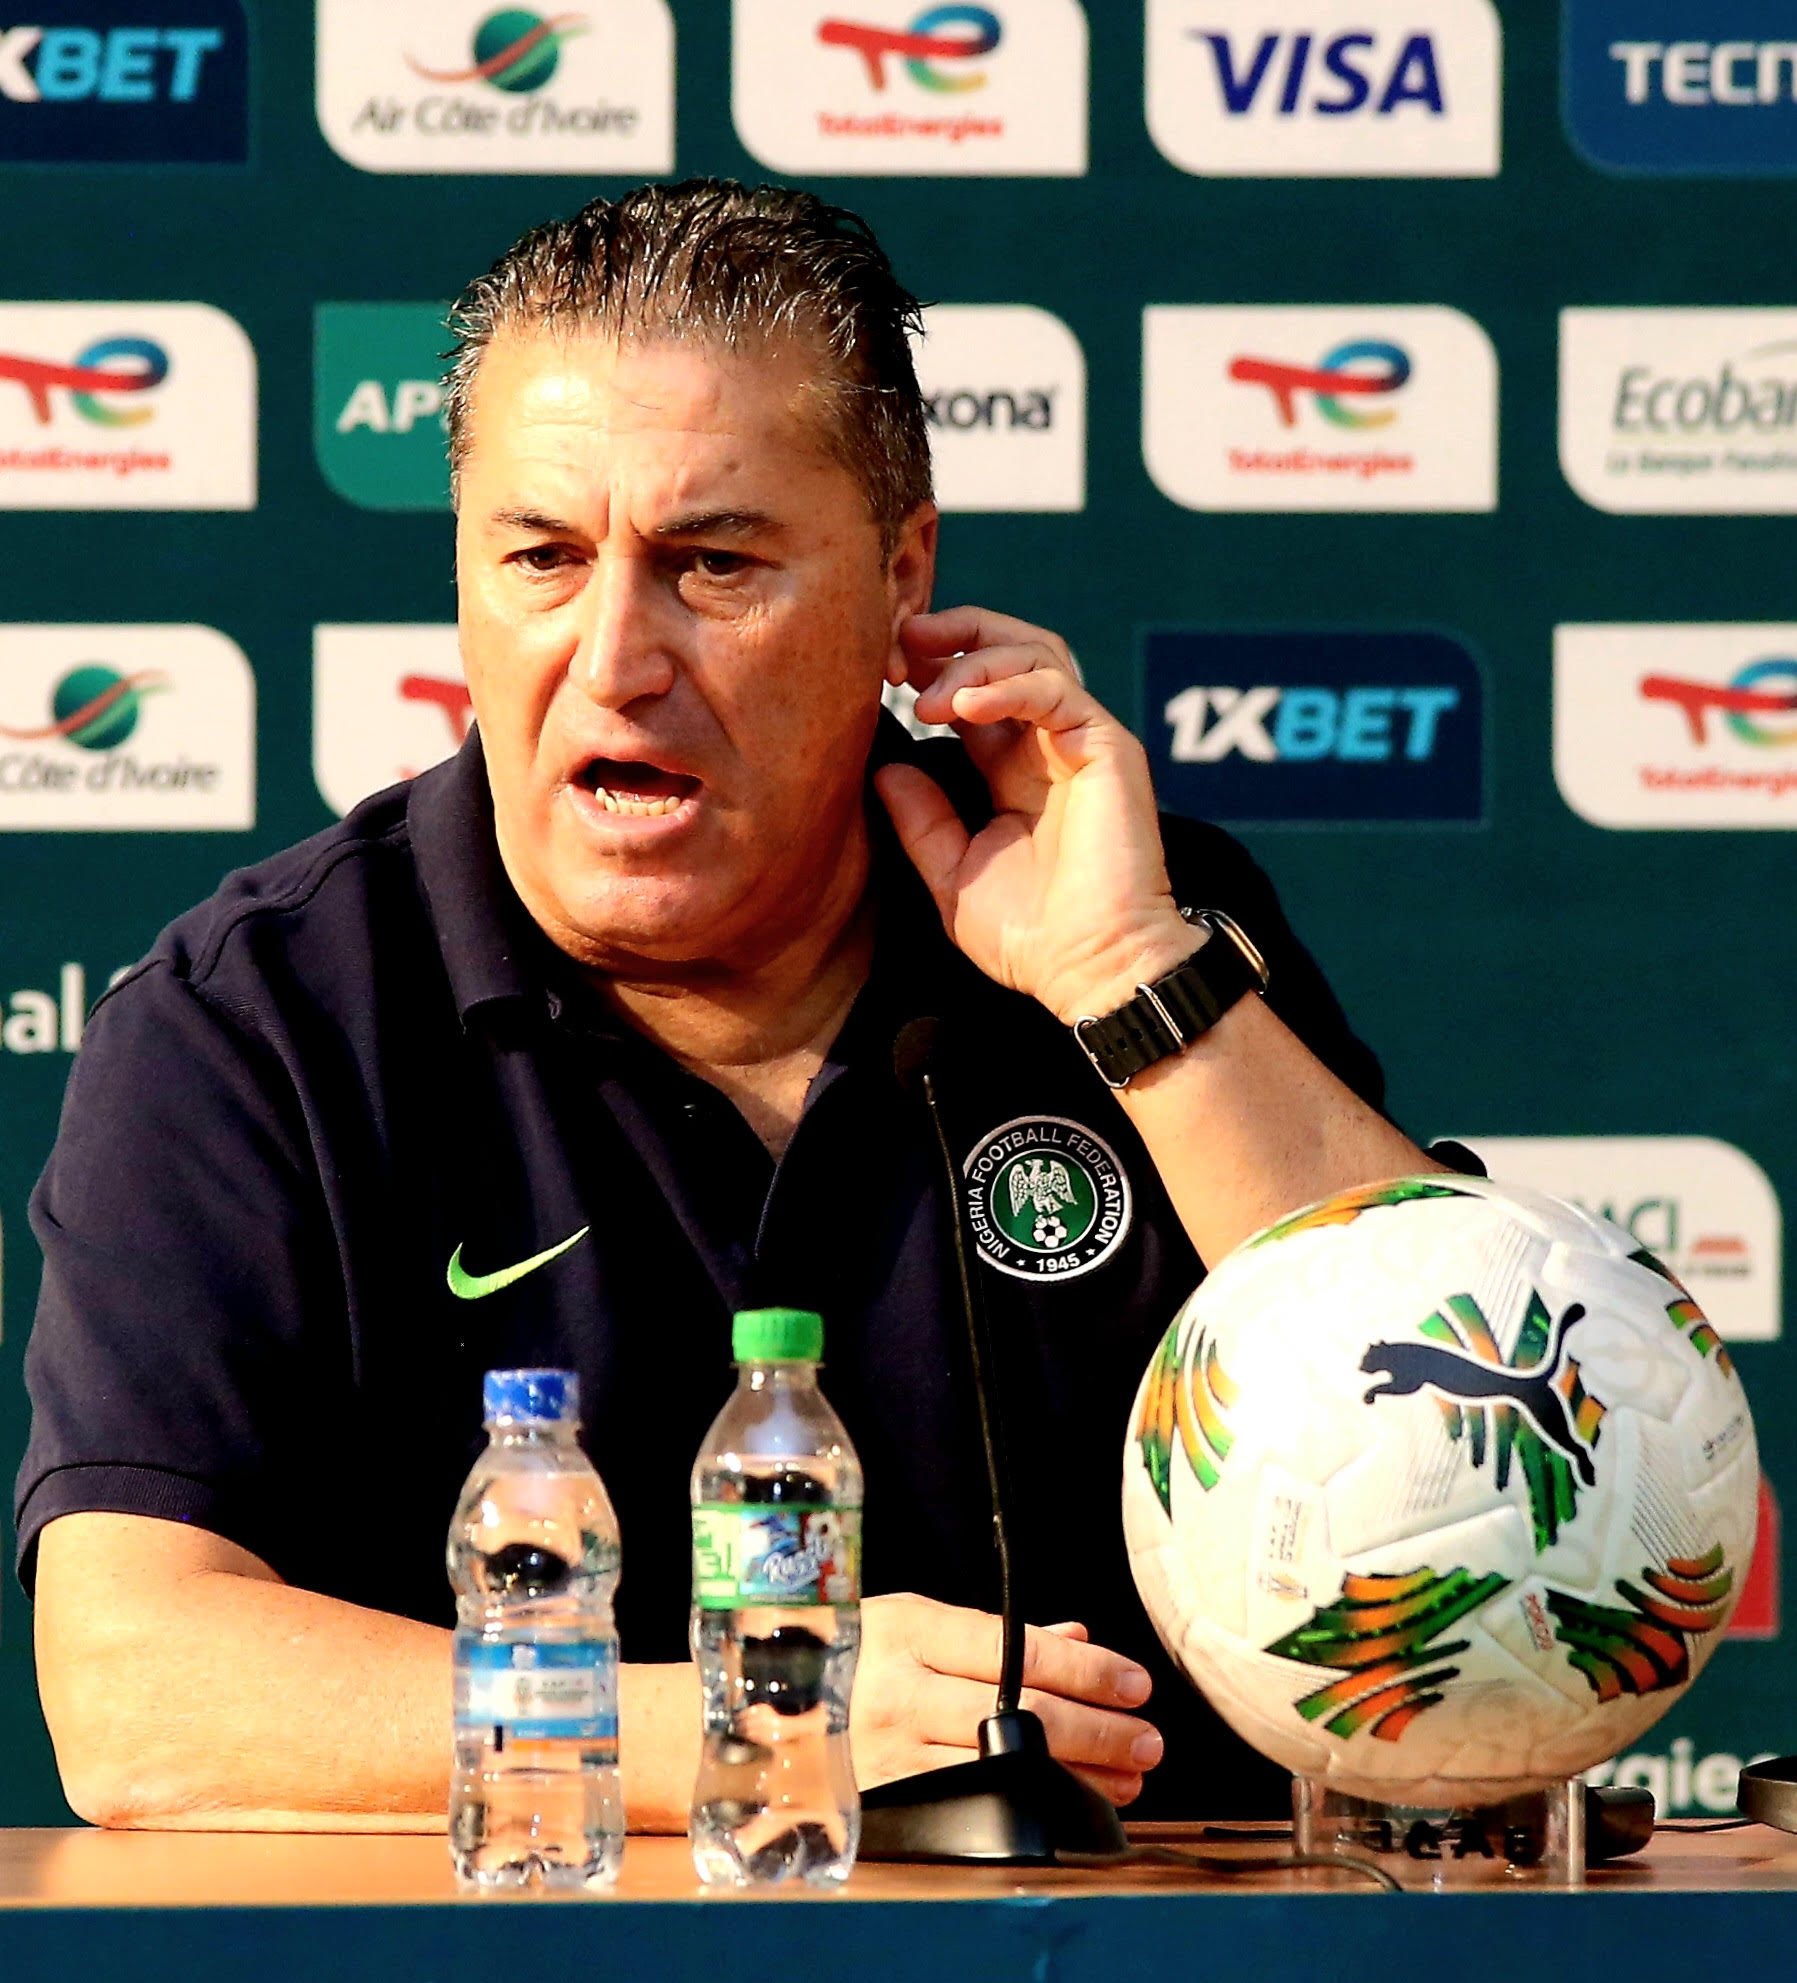 AFCON 2023: "There's a lot work to be done" - Jose Peseiro